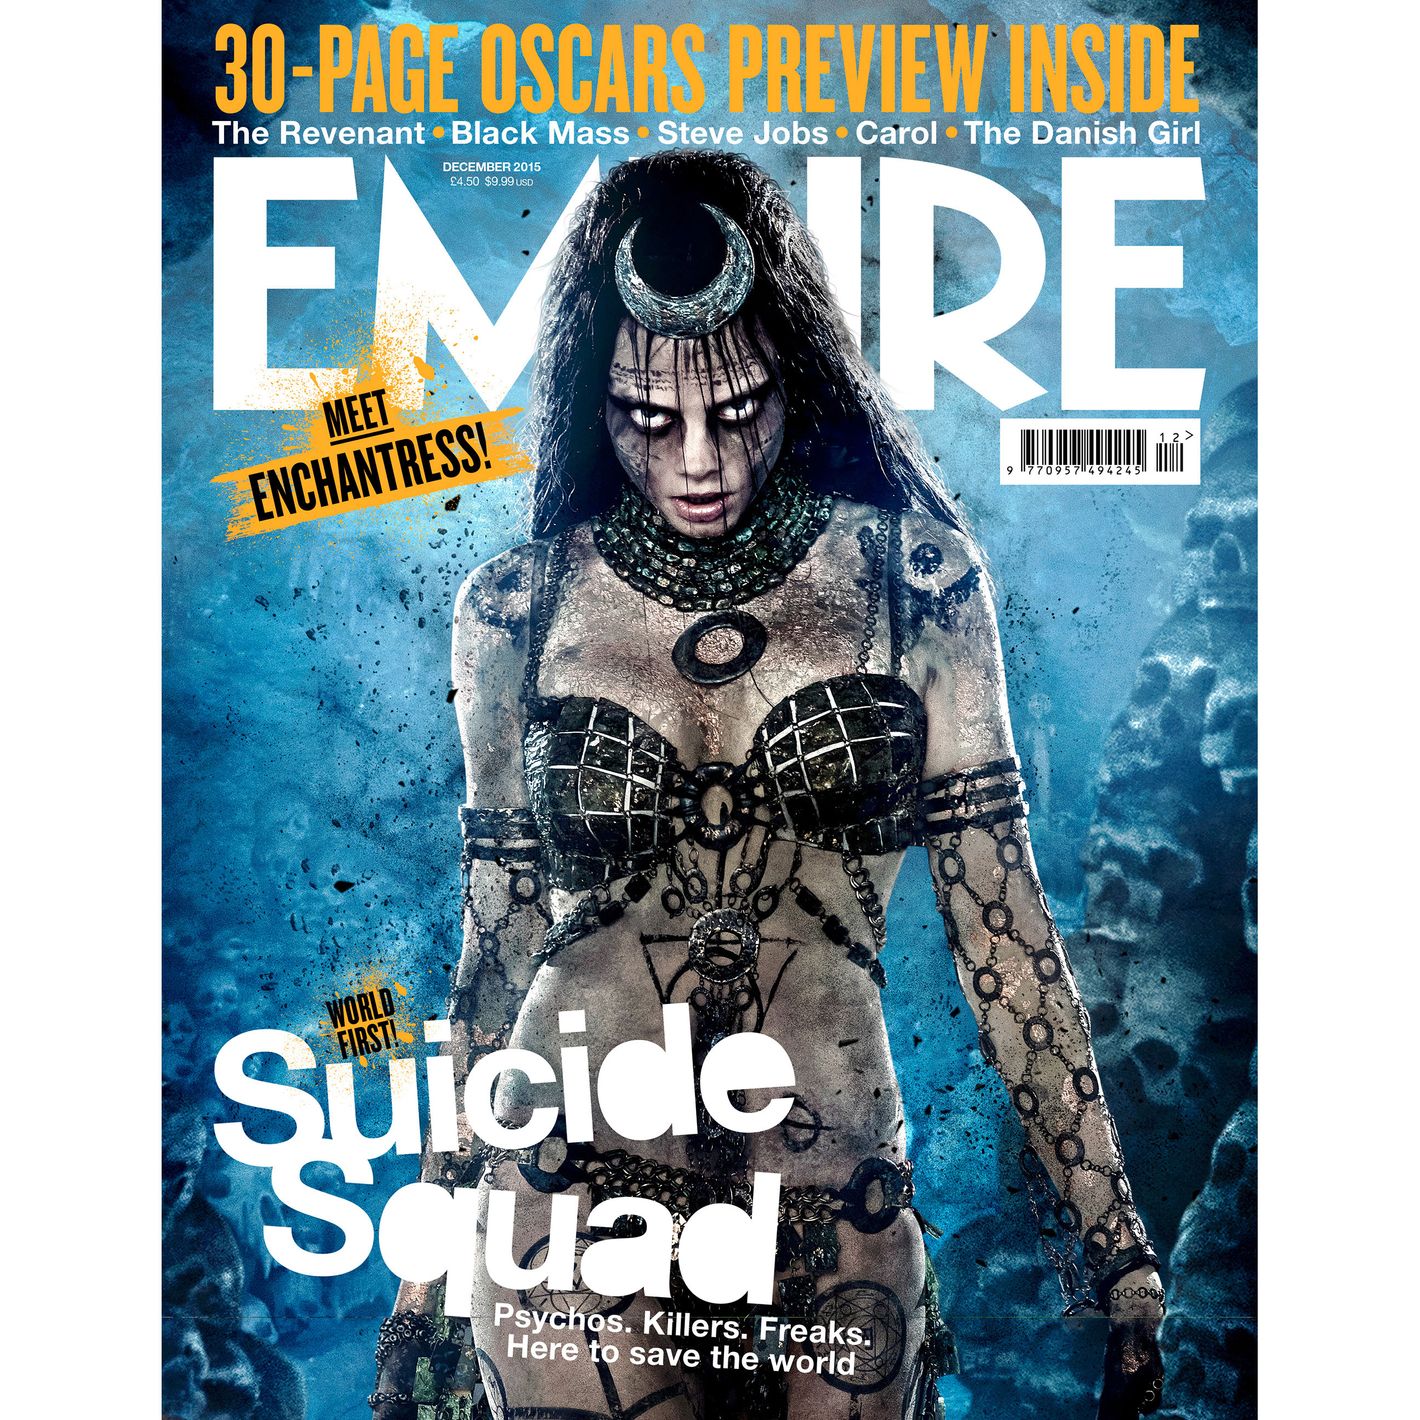 Suicide Squad Magazine Looks Yep Deadshot And Harley Quinn Have Their